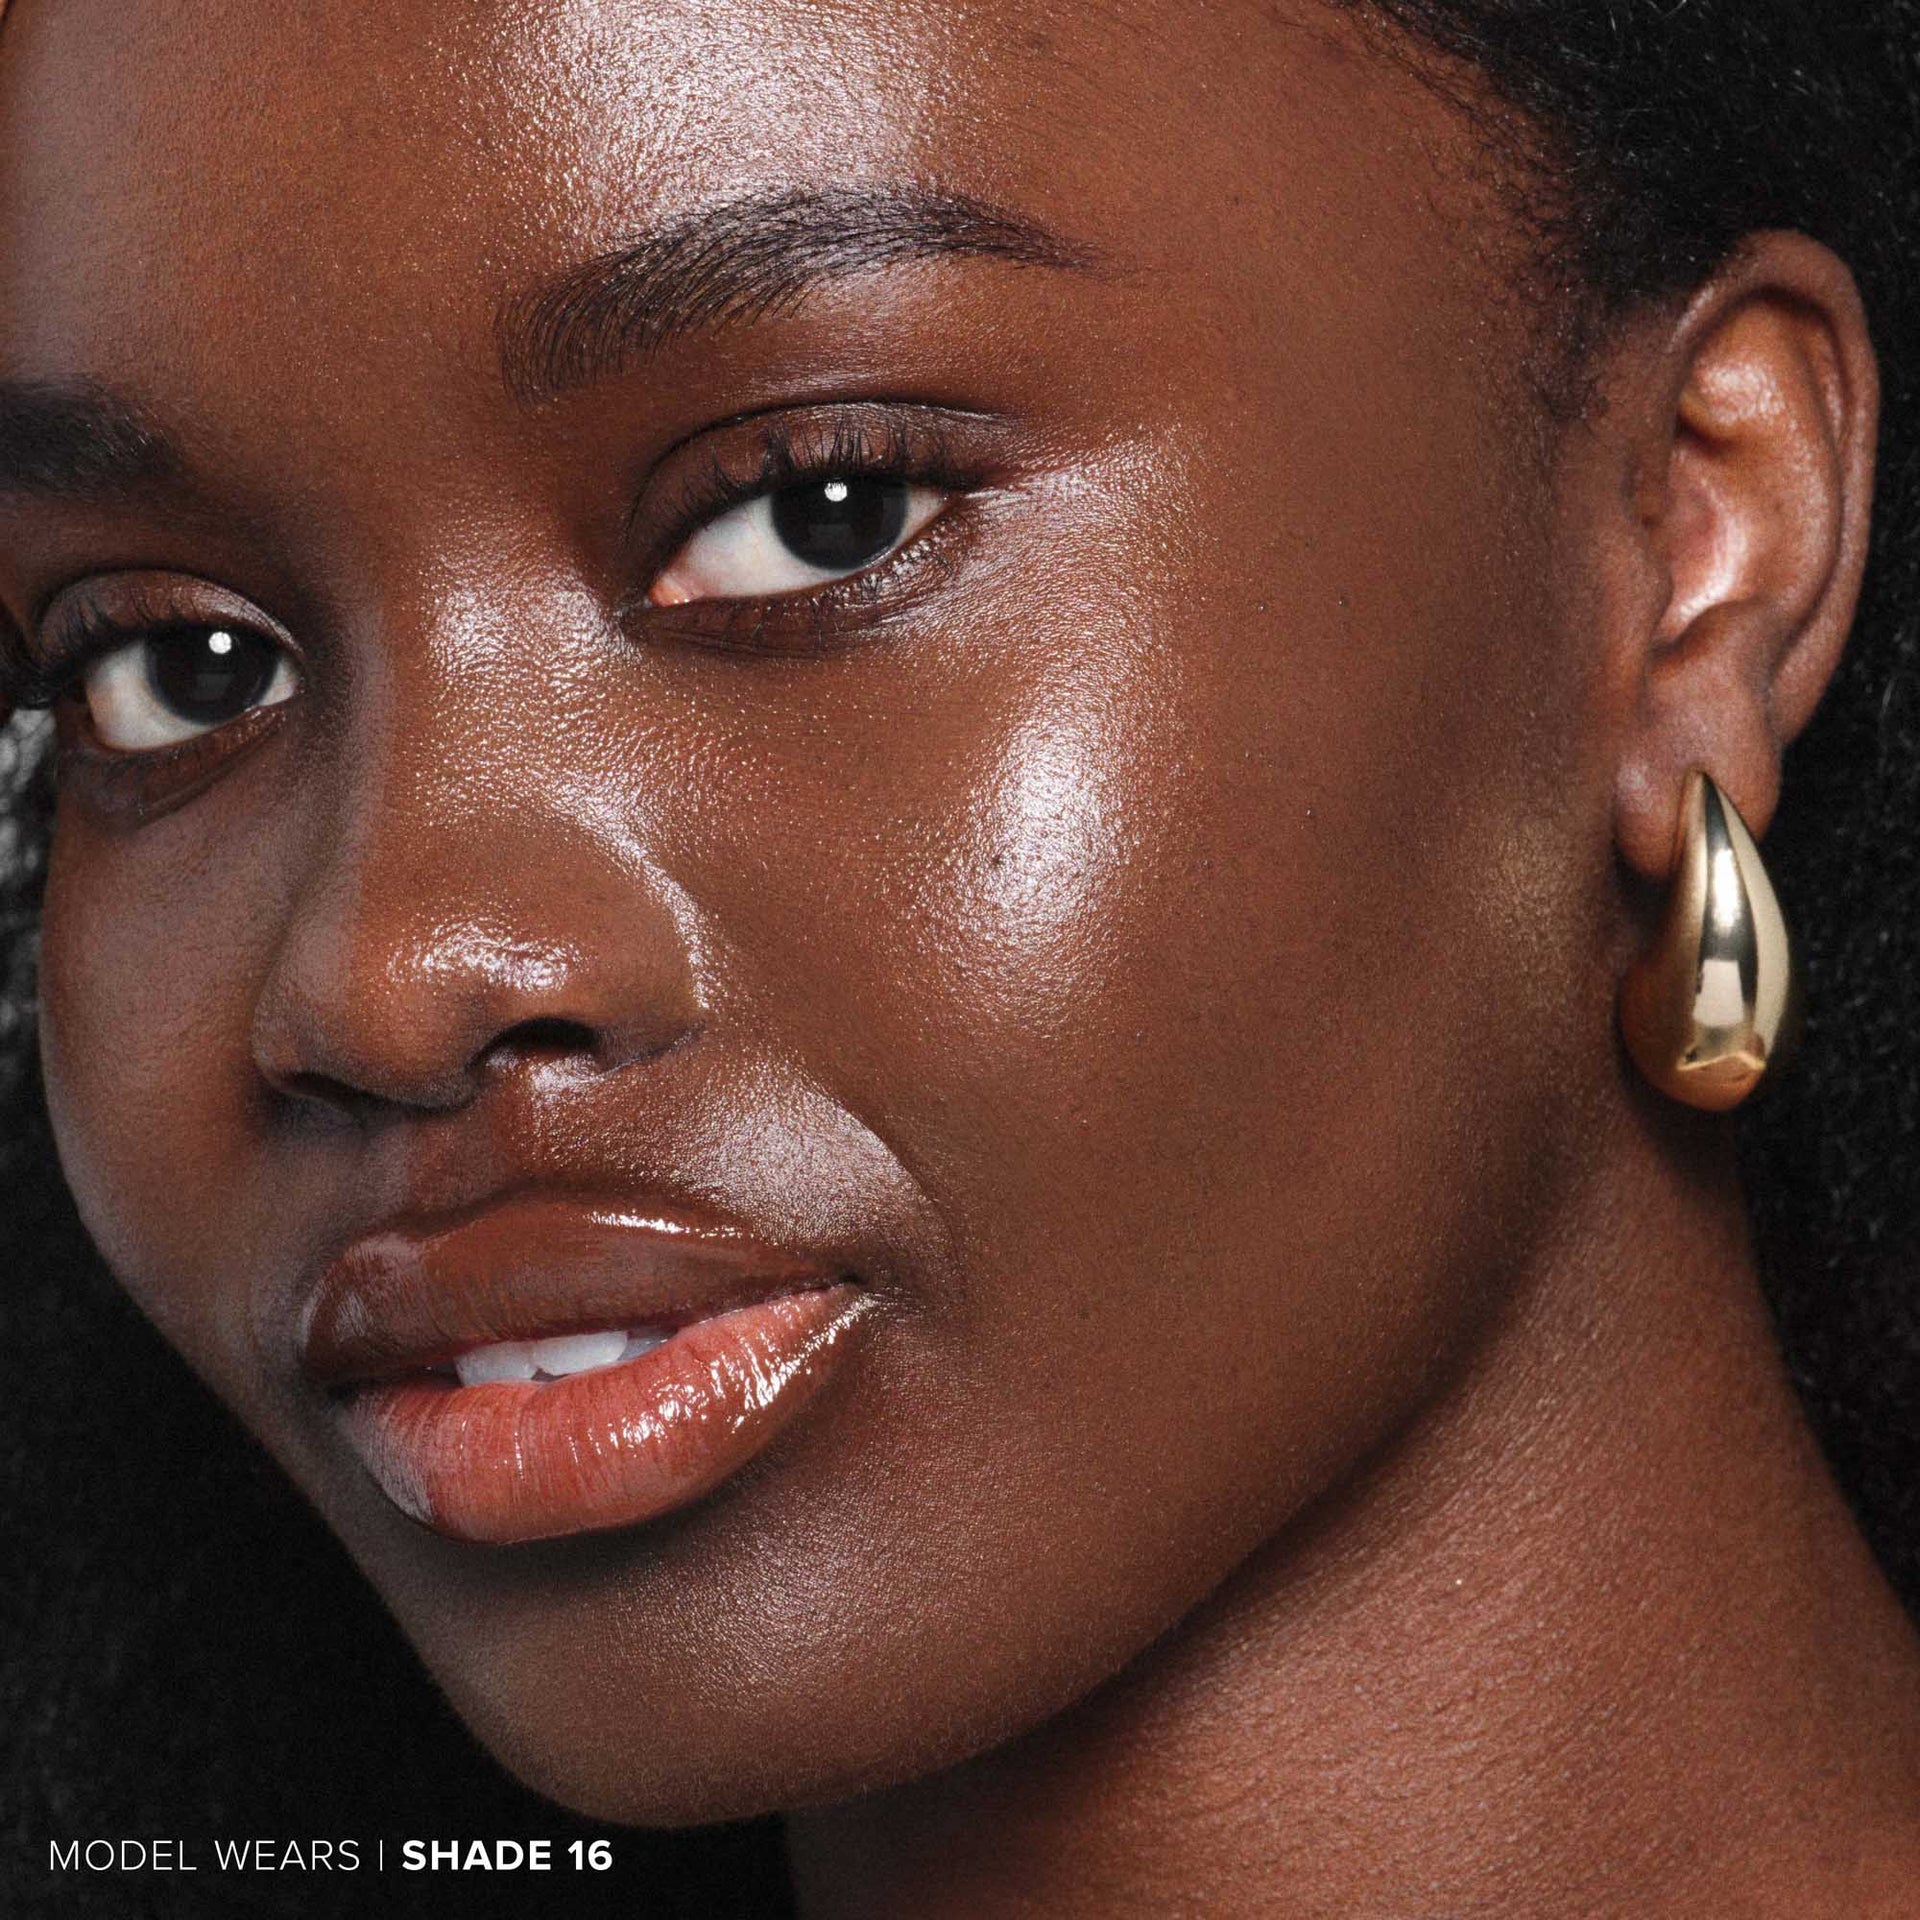 Shade 16 | Beauty Balm Serum Boosted Skin Tint On Model - Shade 16